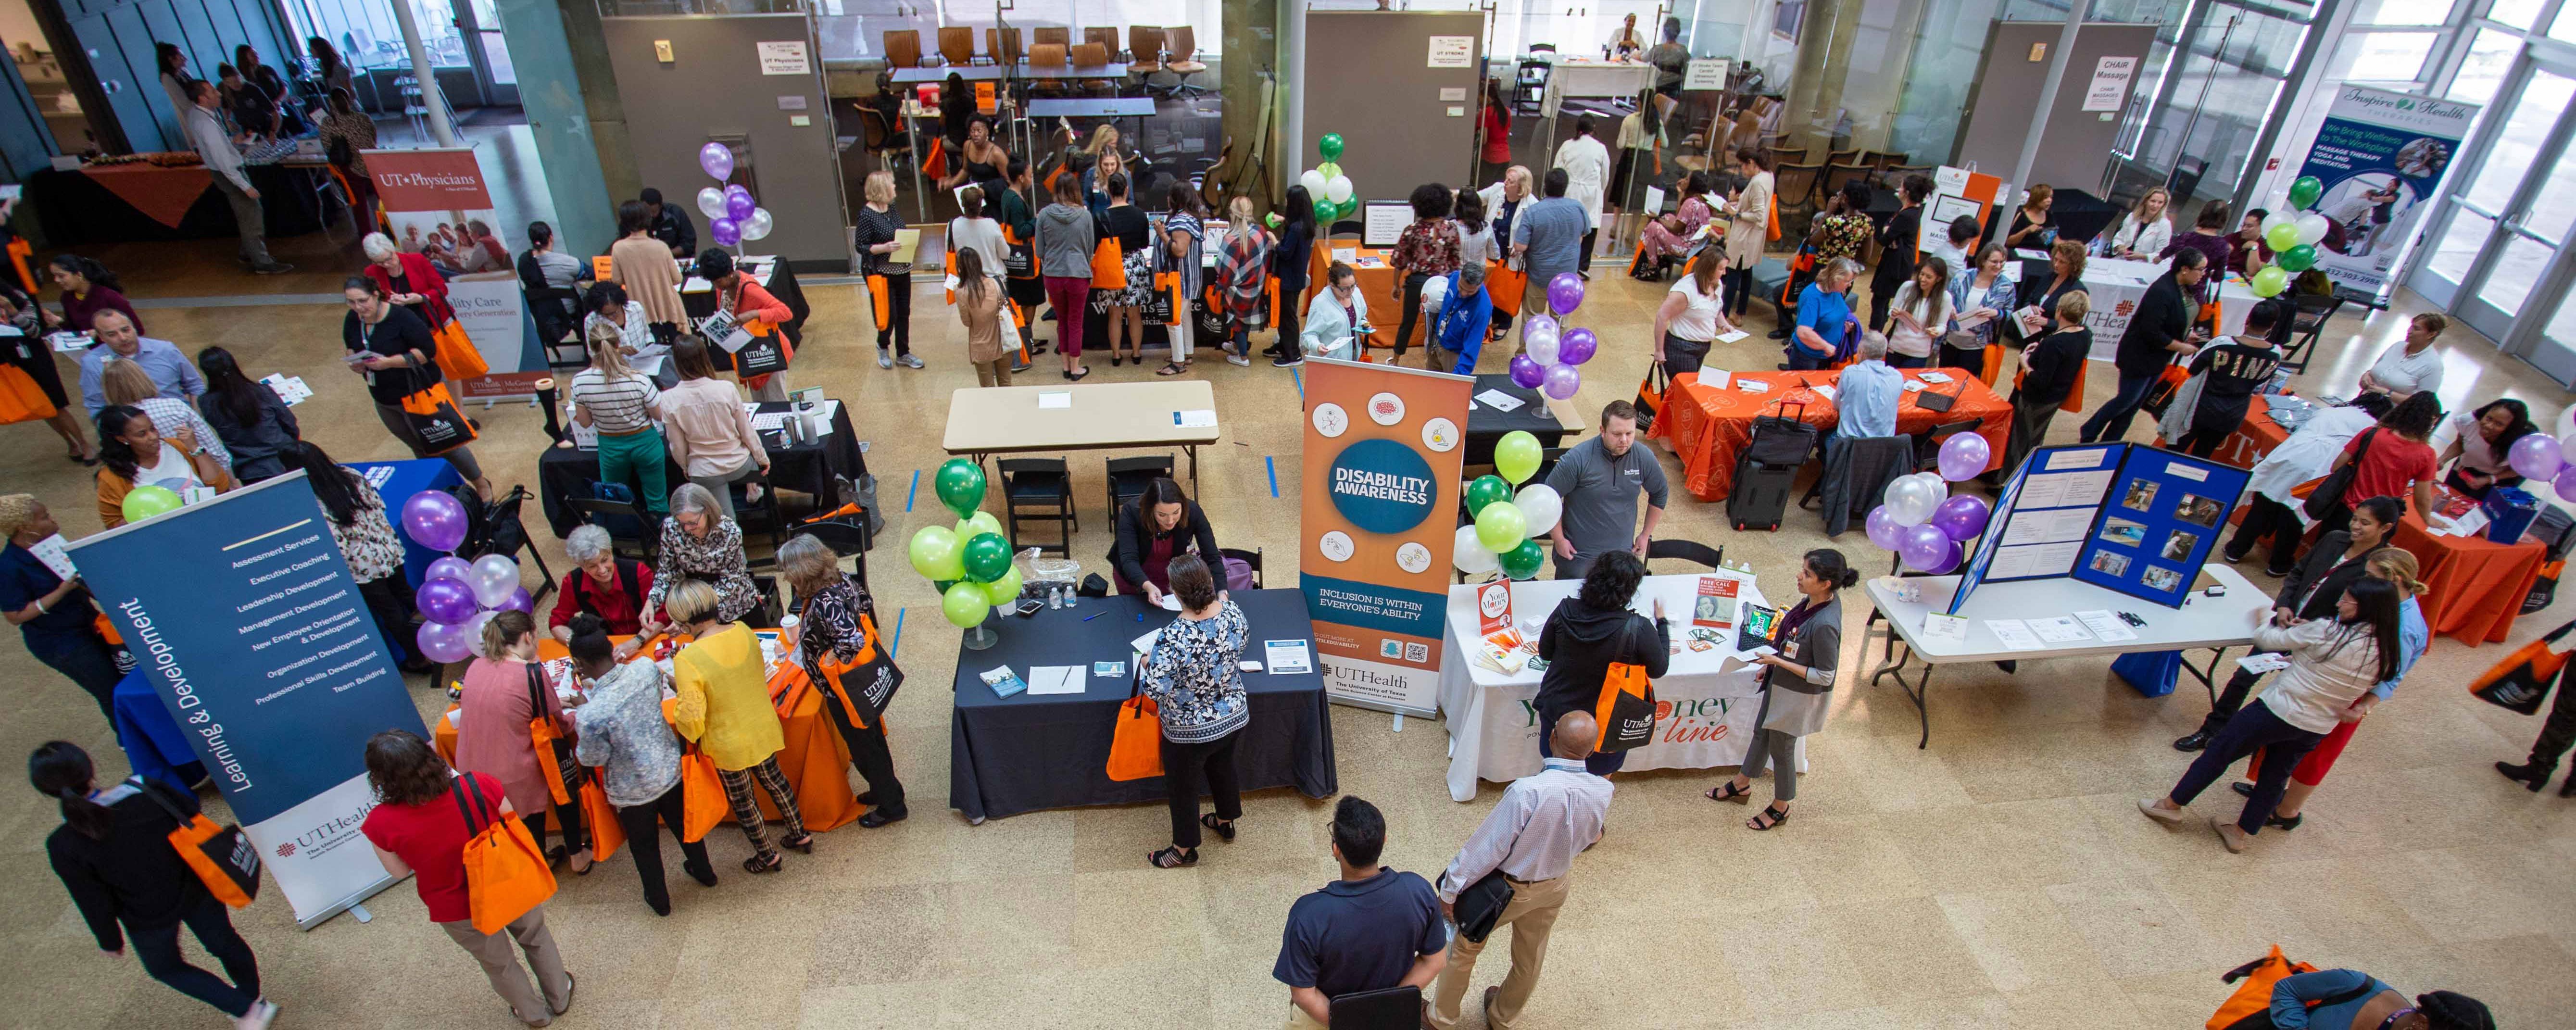 UTHealth Well-Being Fair showcased the six elements of health